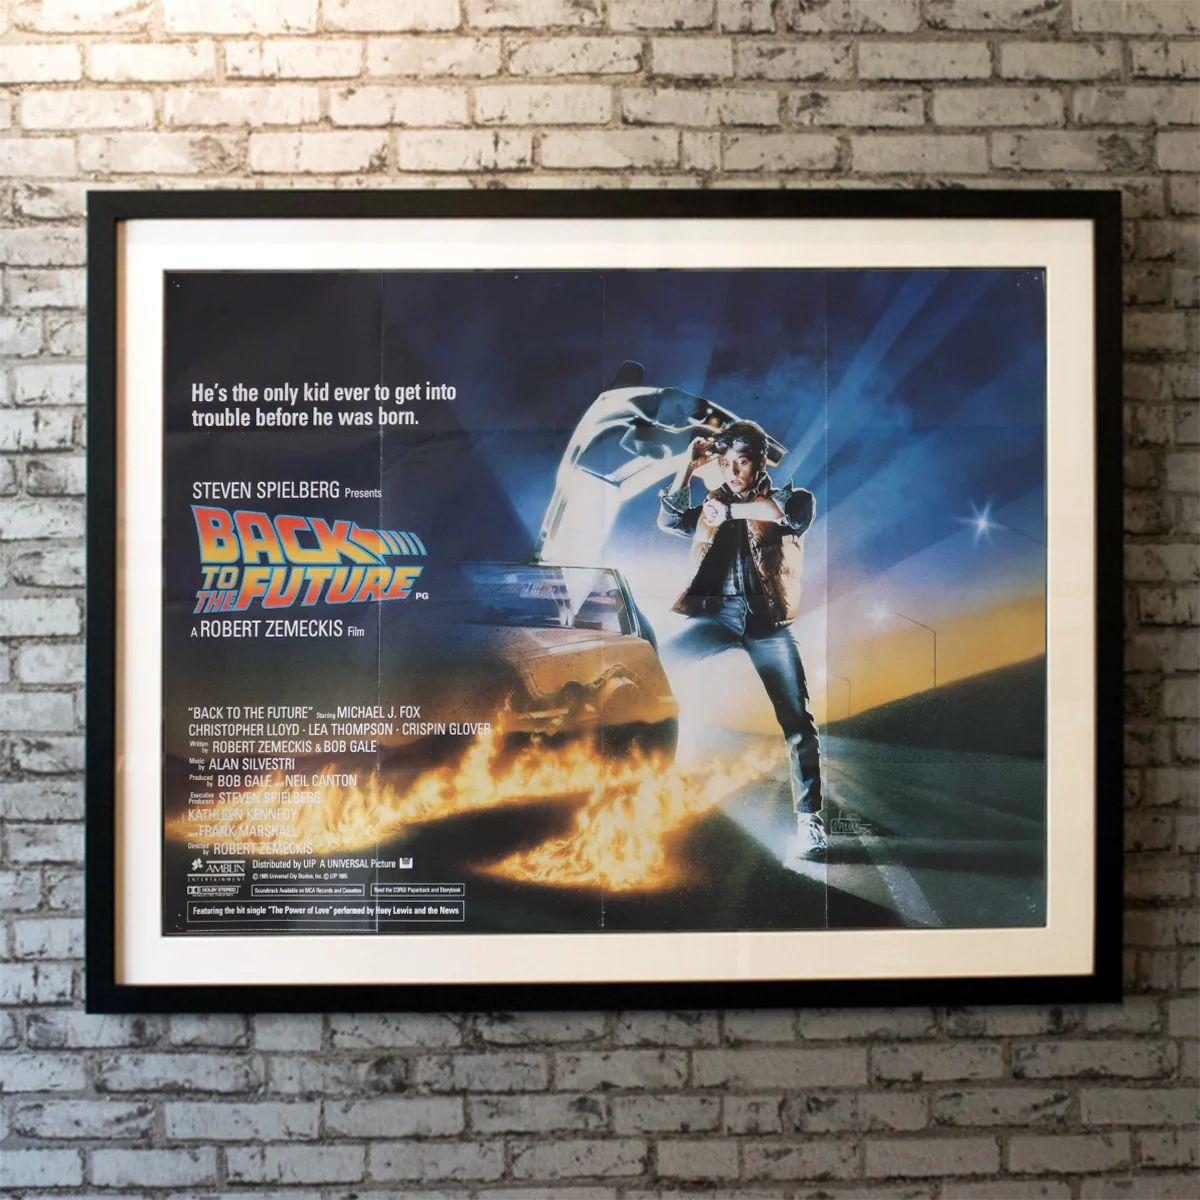 Back To The Future, Unframed Poster, 1985

Original British Quad (30 X 40 Inches). Marty McFly, a 17-year-old high school student, is accidentally sent 30 years into the past in a time-traveling DeLorean invented by his close friend, the maverick